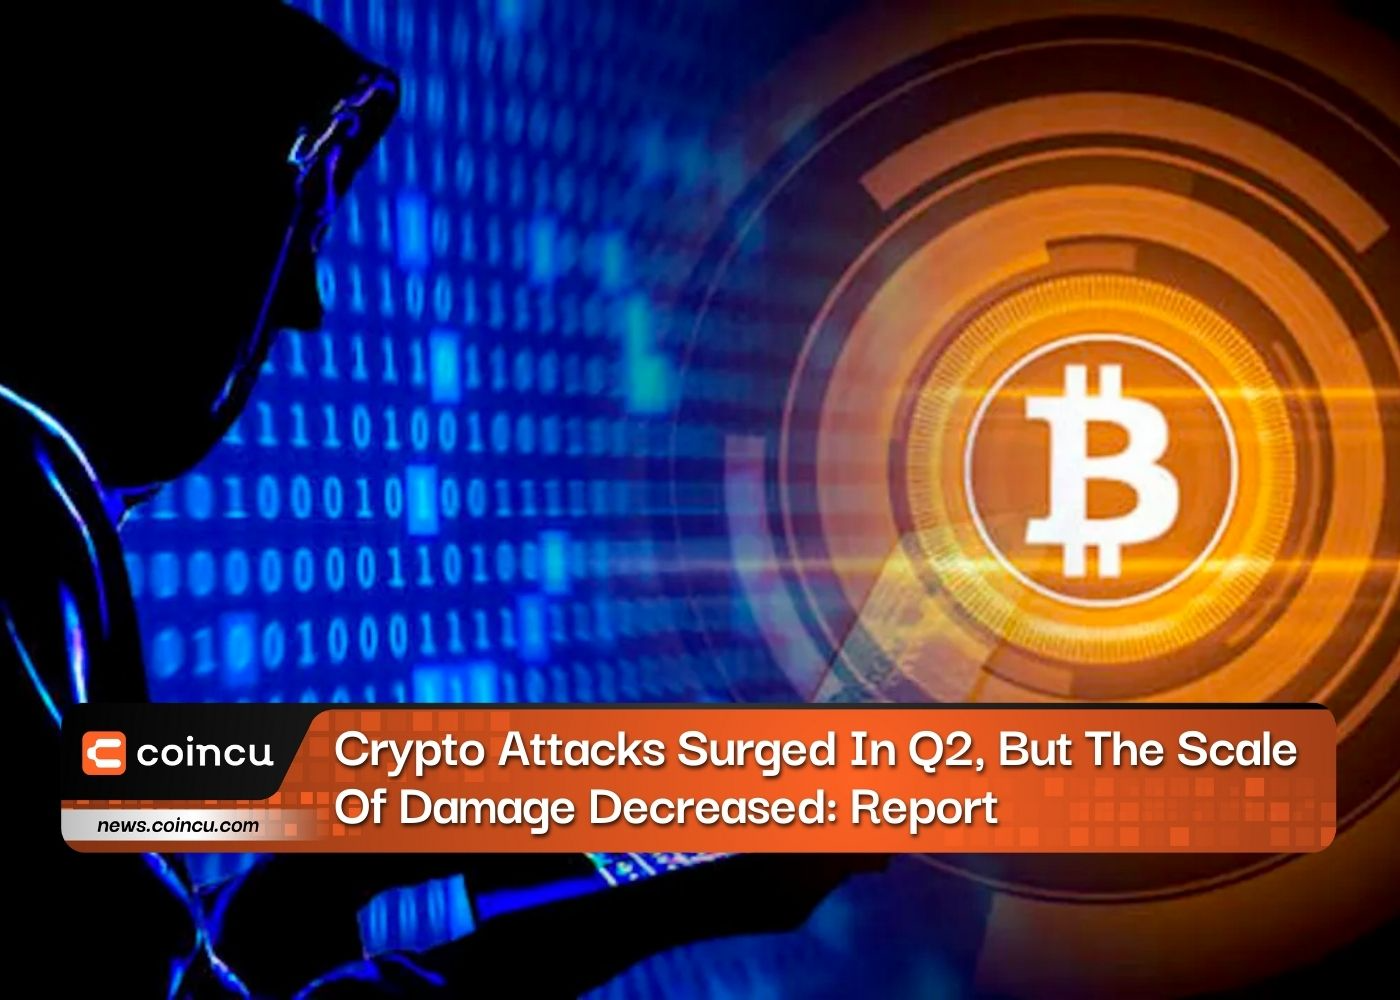 Crypto Attacks Surged In Q2, But The Scale Of Damage Decreased: Report